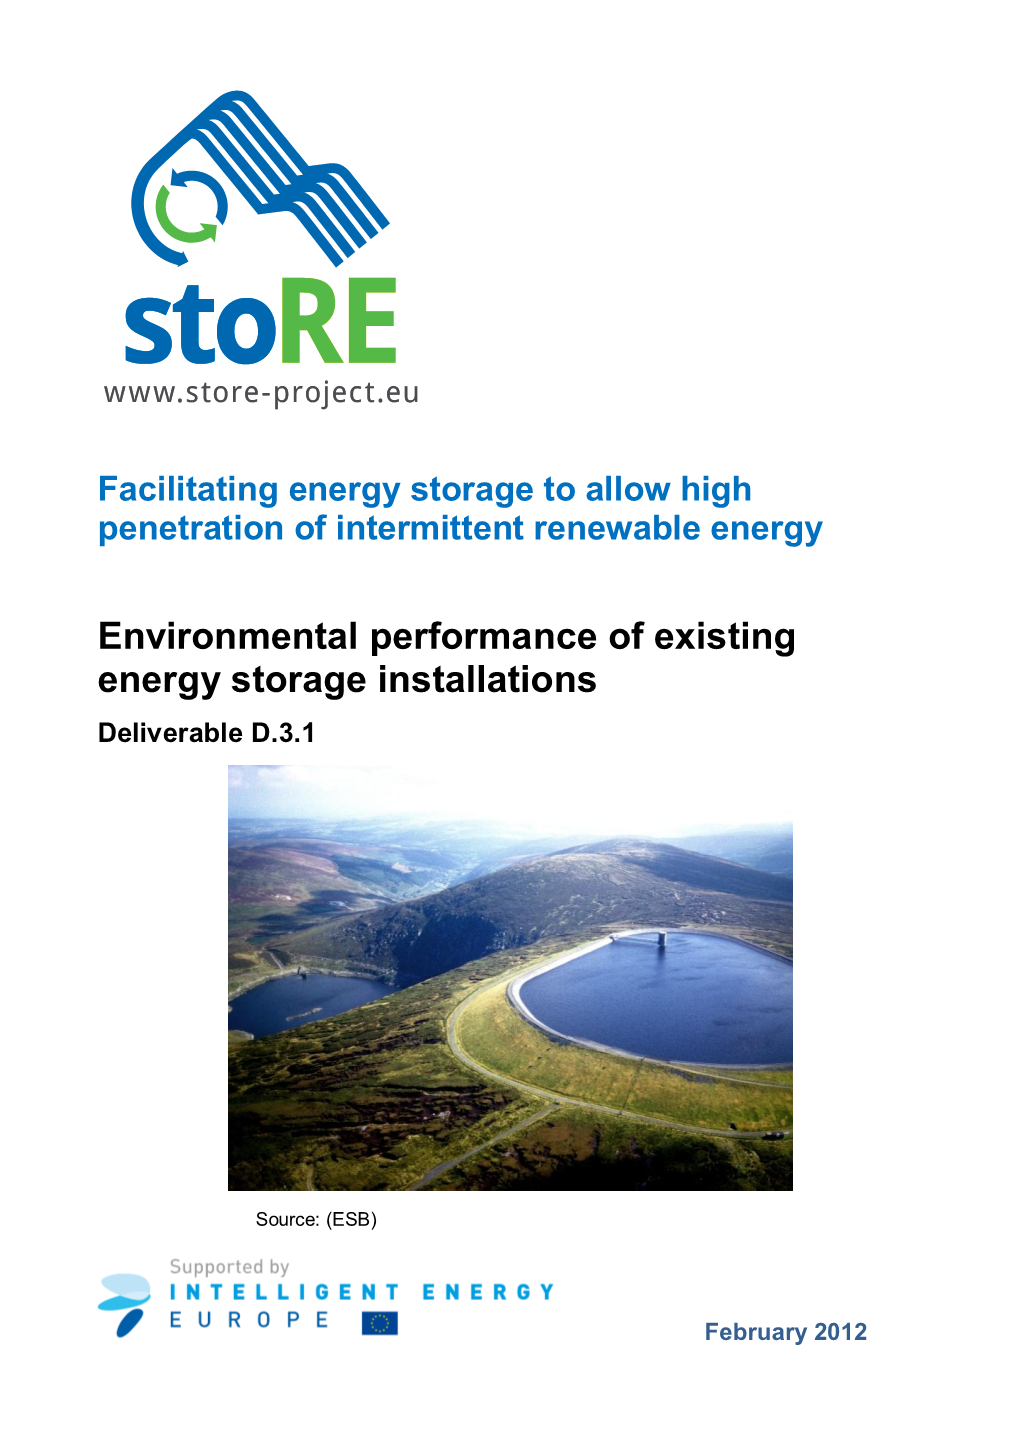 Environmental Performance of Existing Energy Storage Installations Deliverable D.3.1